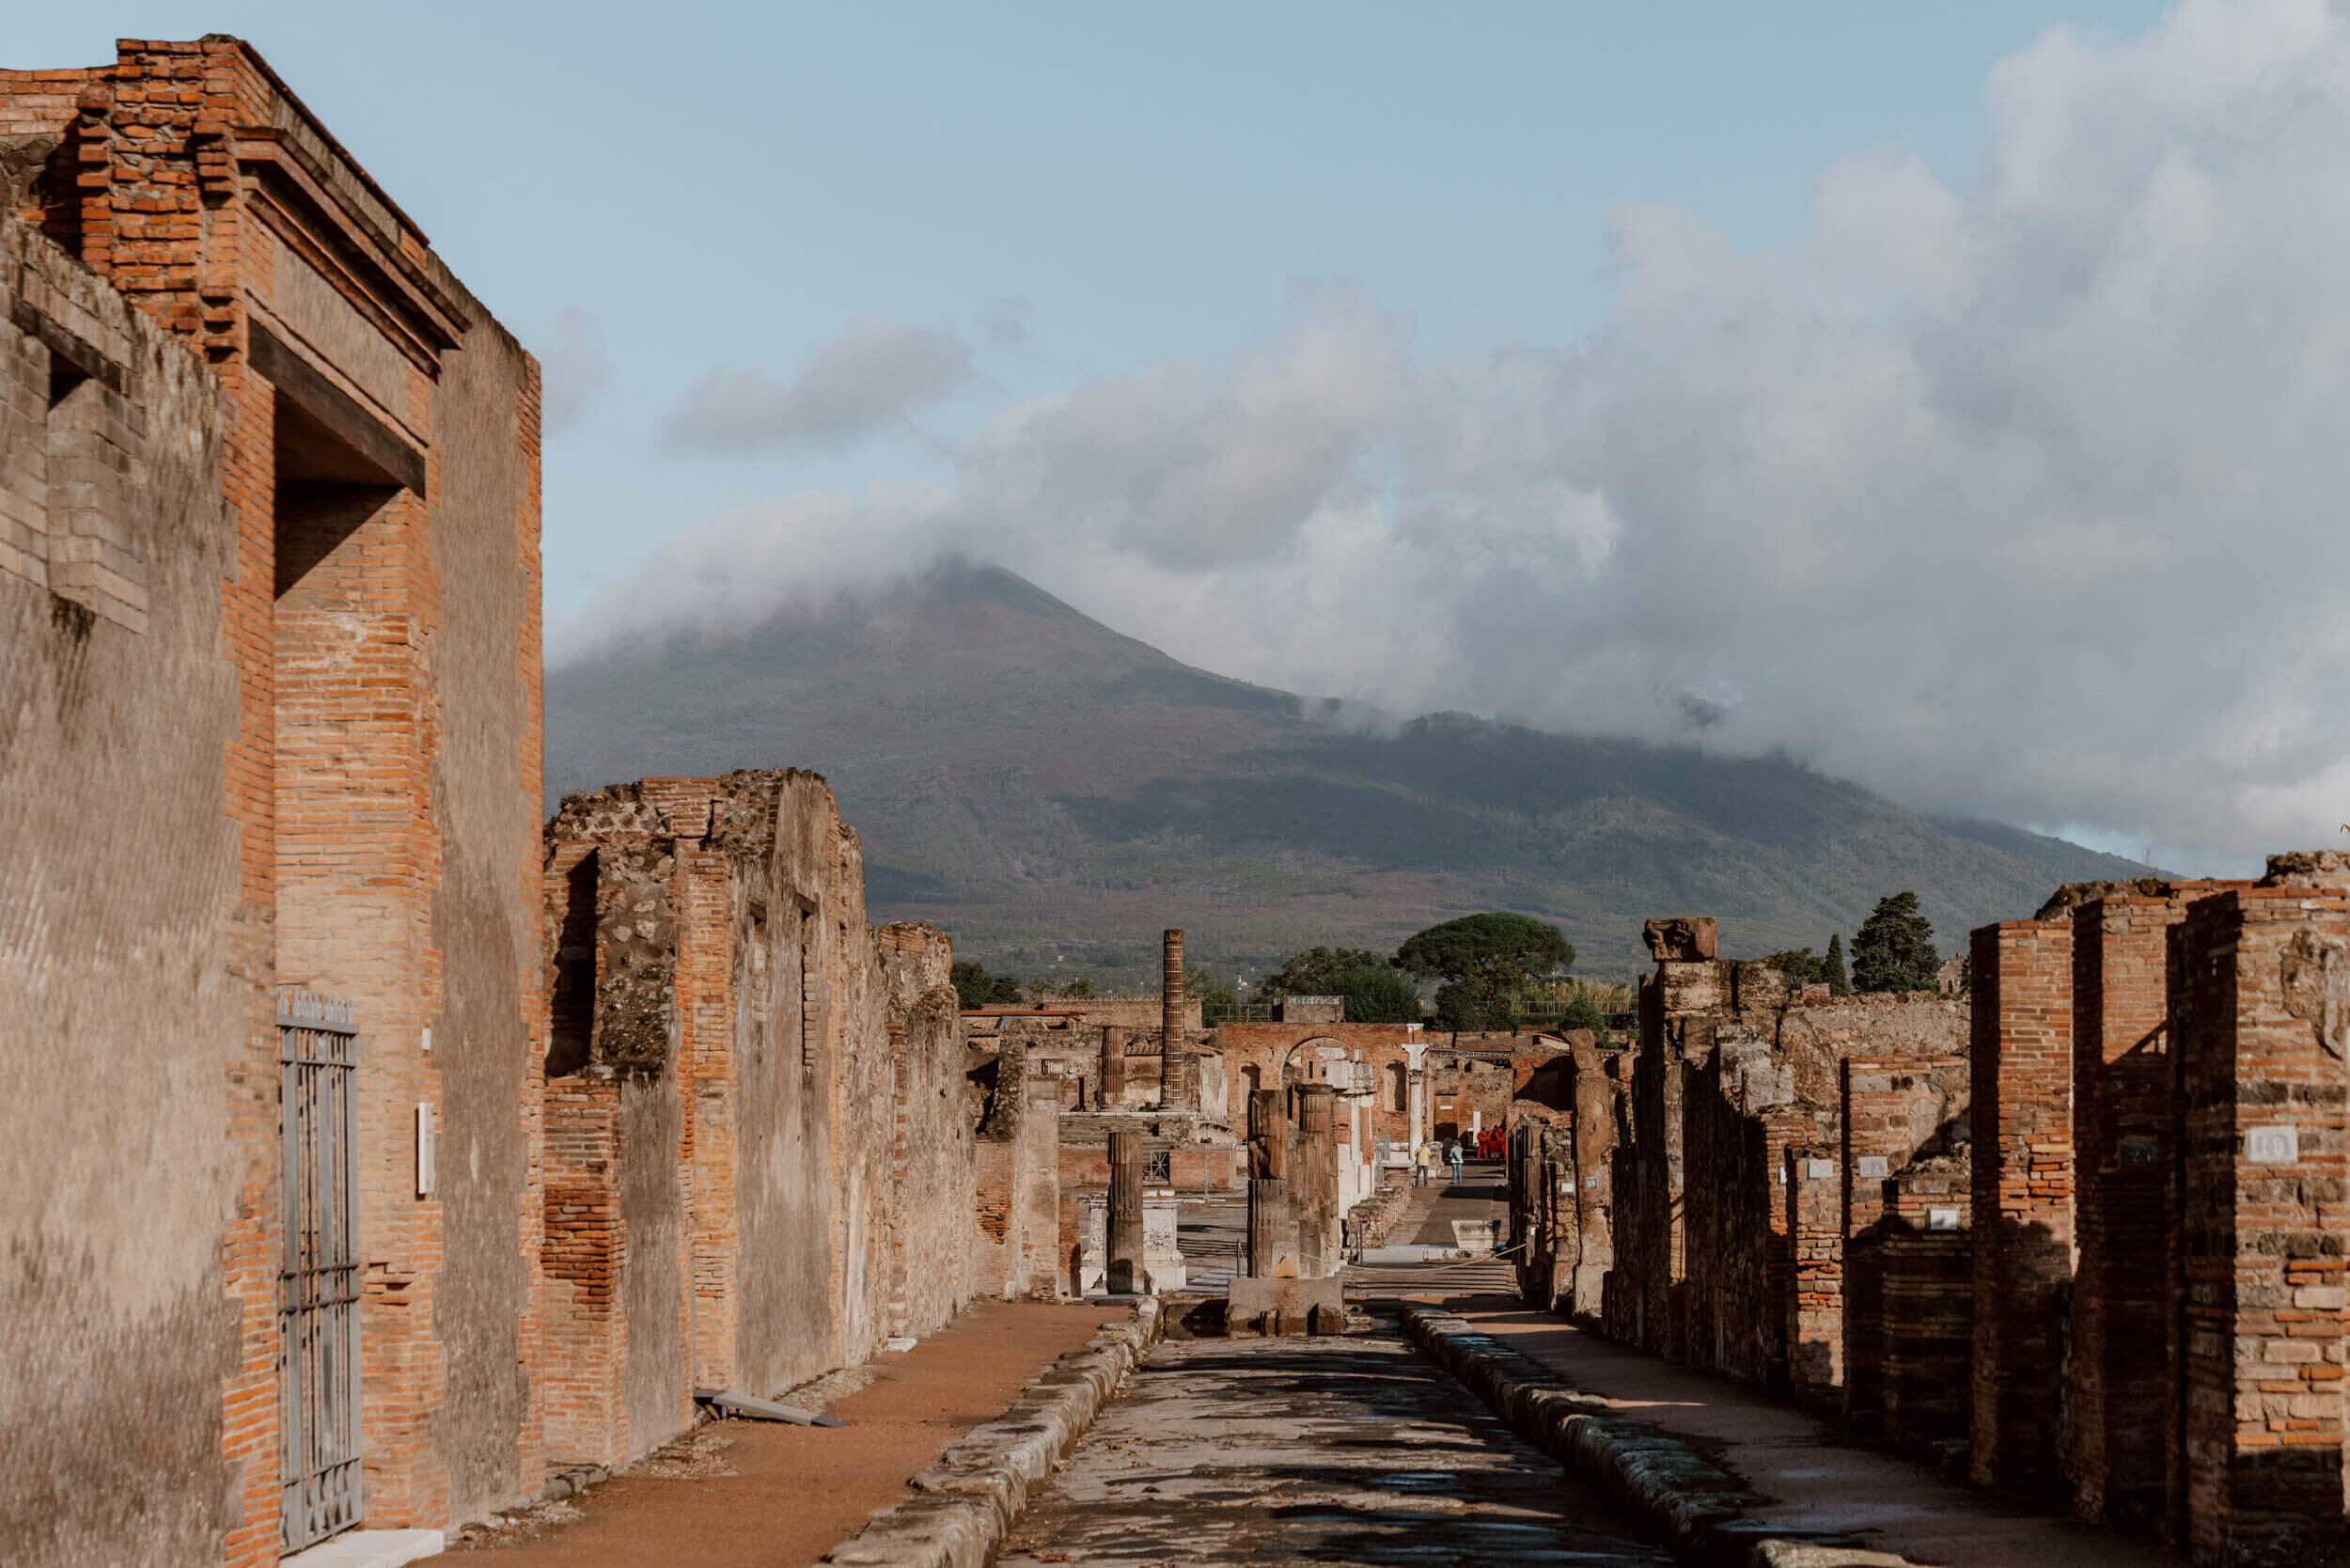 The ruins of Pompeii with Mt. Vesuvius in the background